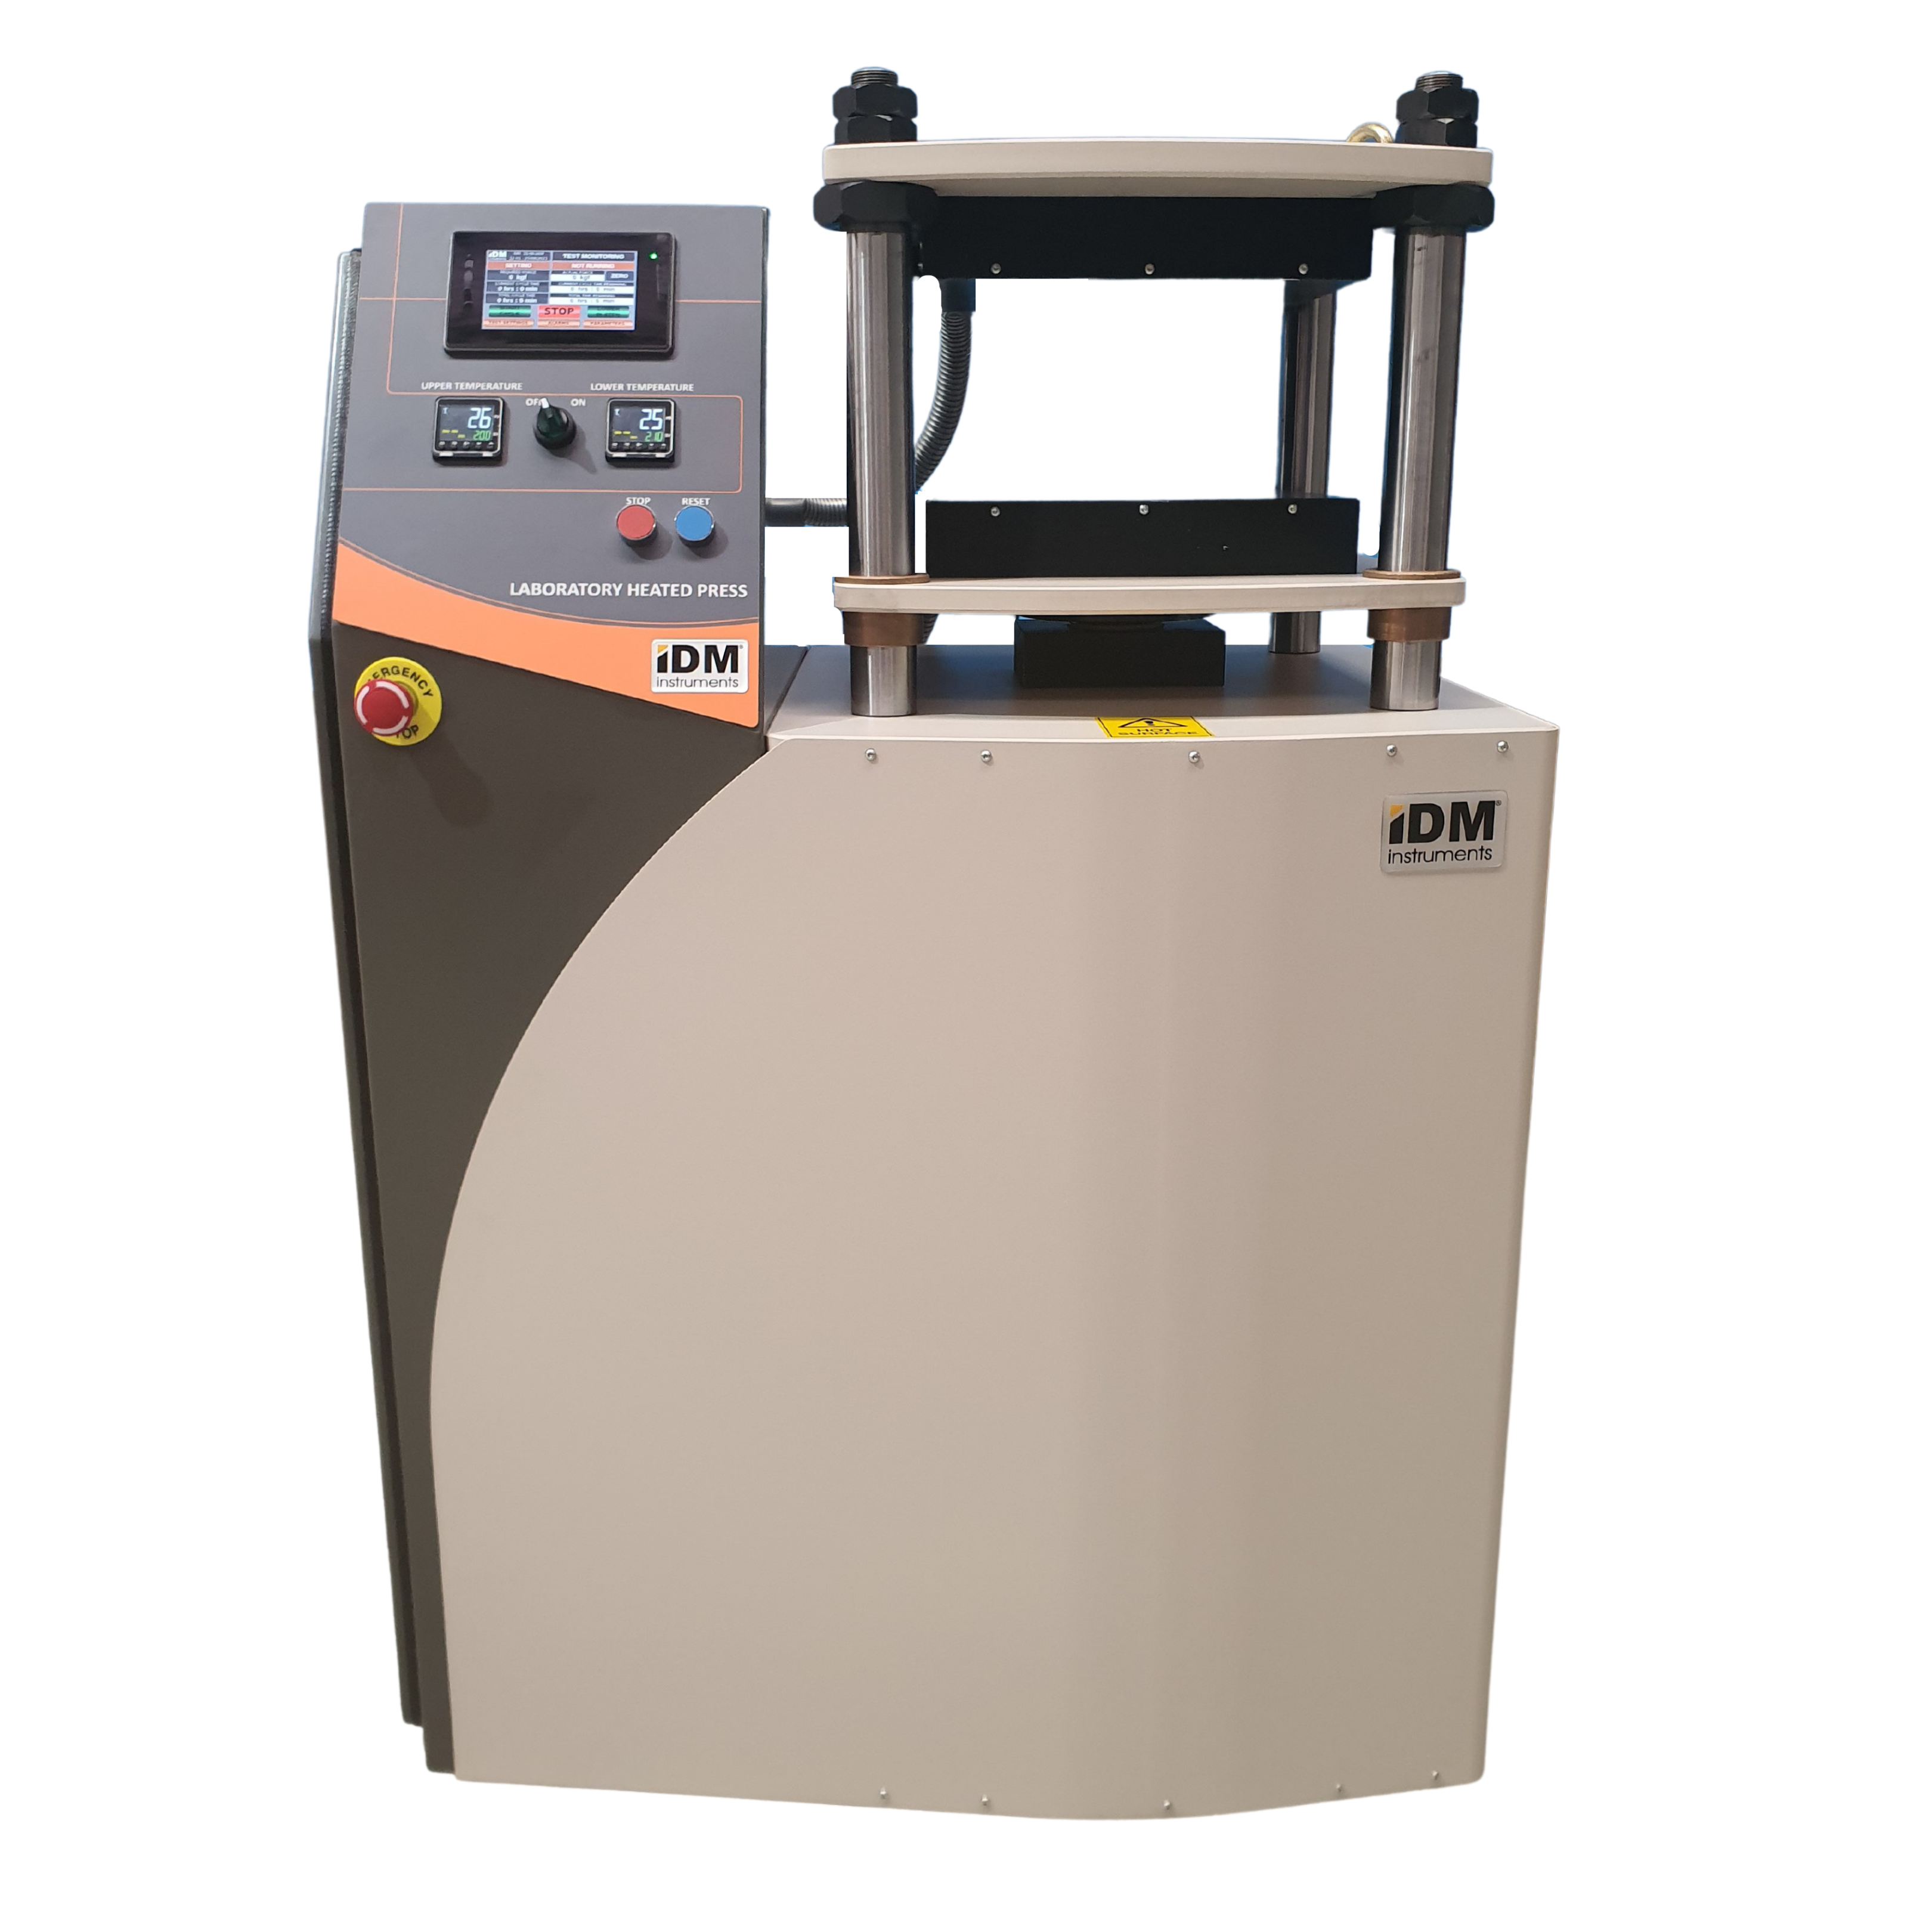 Laboratory Heated Press for composite materials